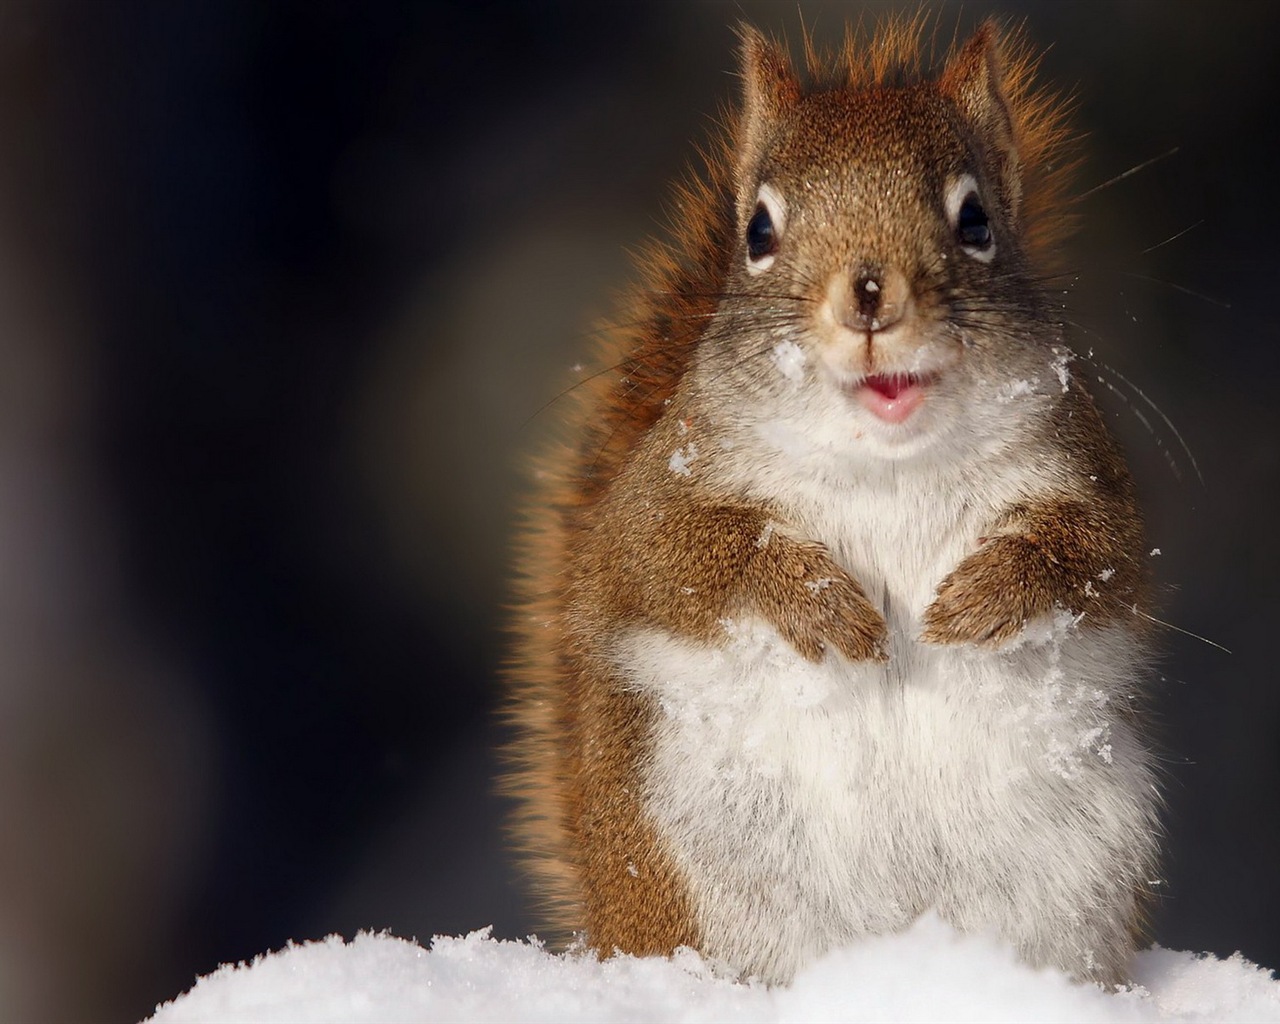 Animal close-up, cute squirrel HD wallpapers #14 - 1280x1024